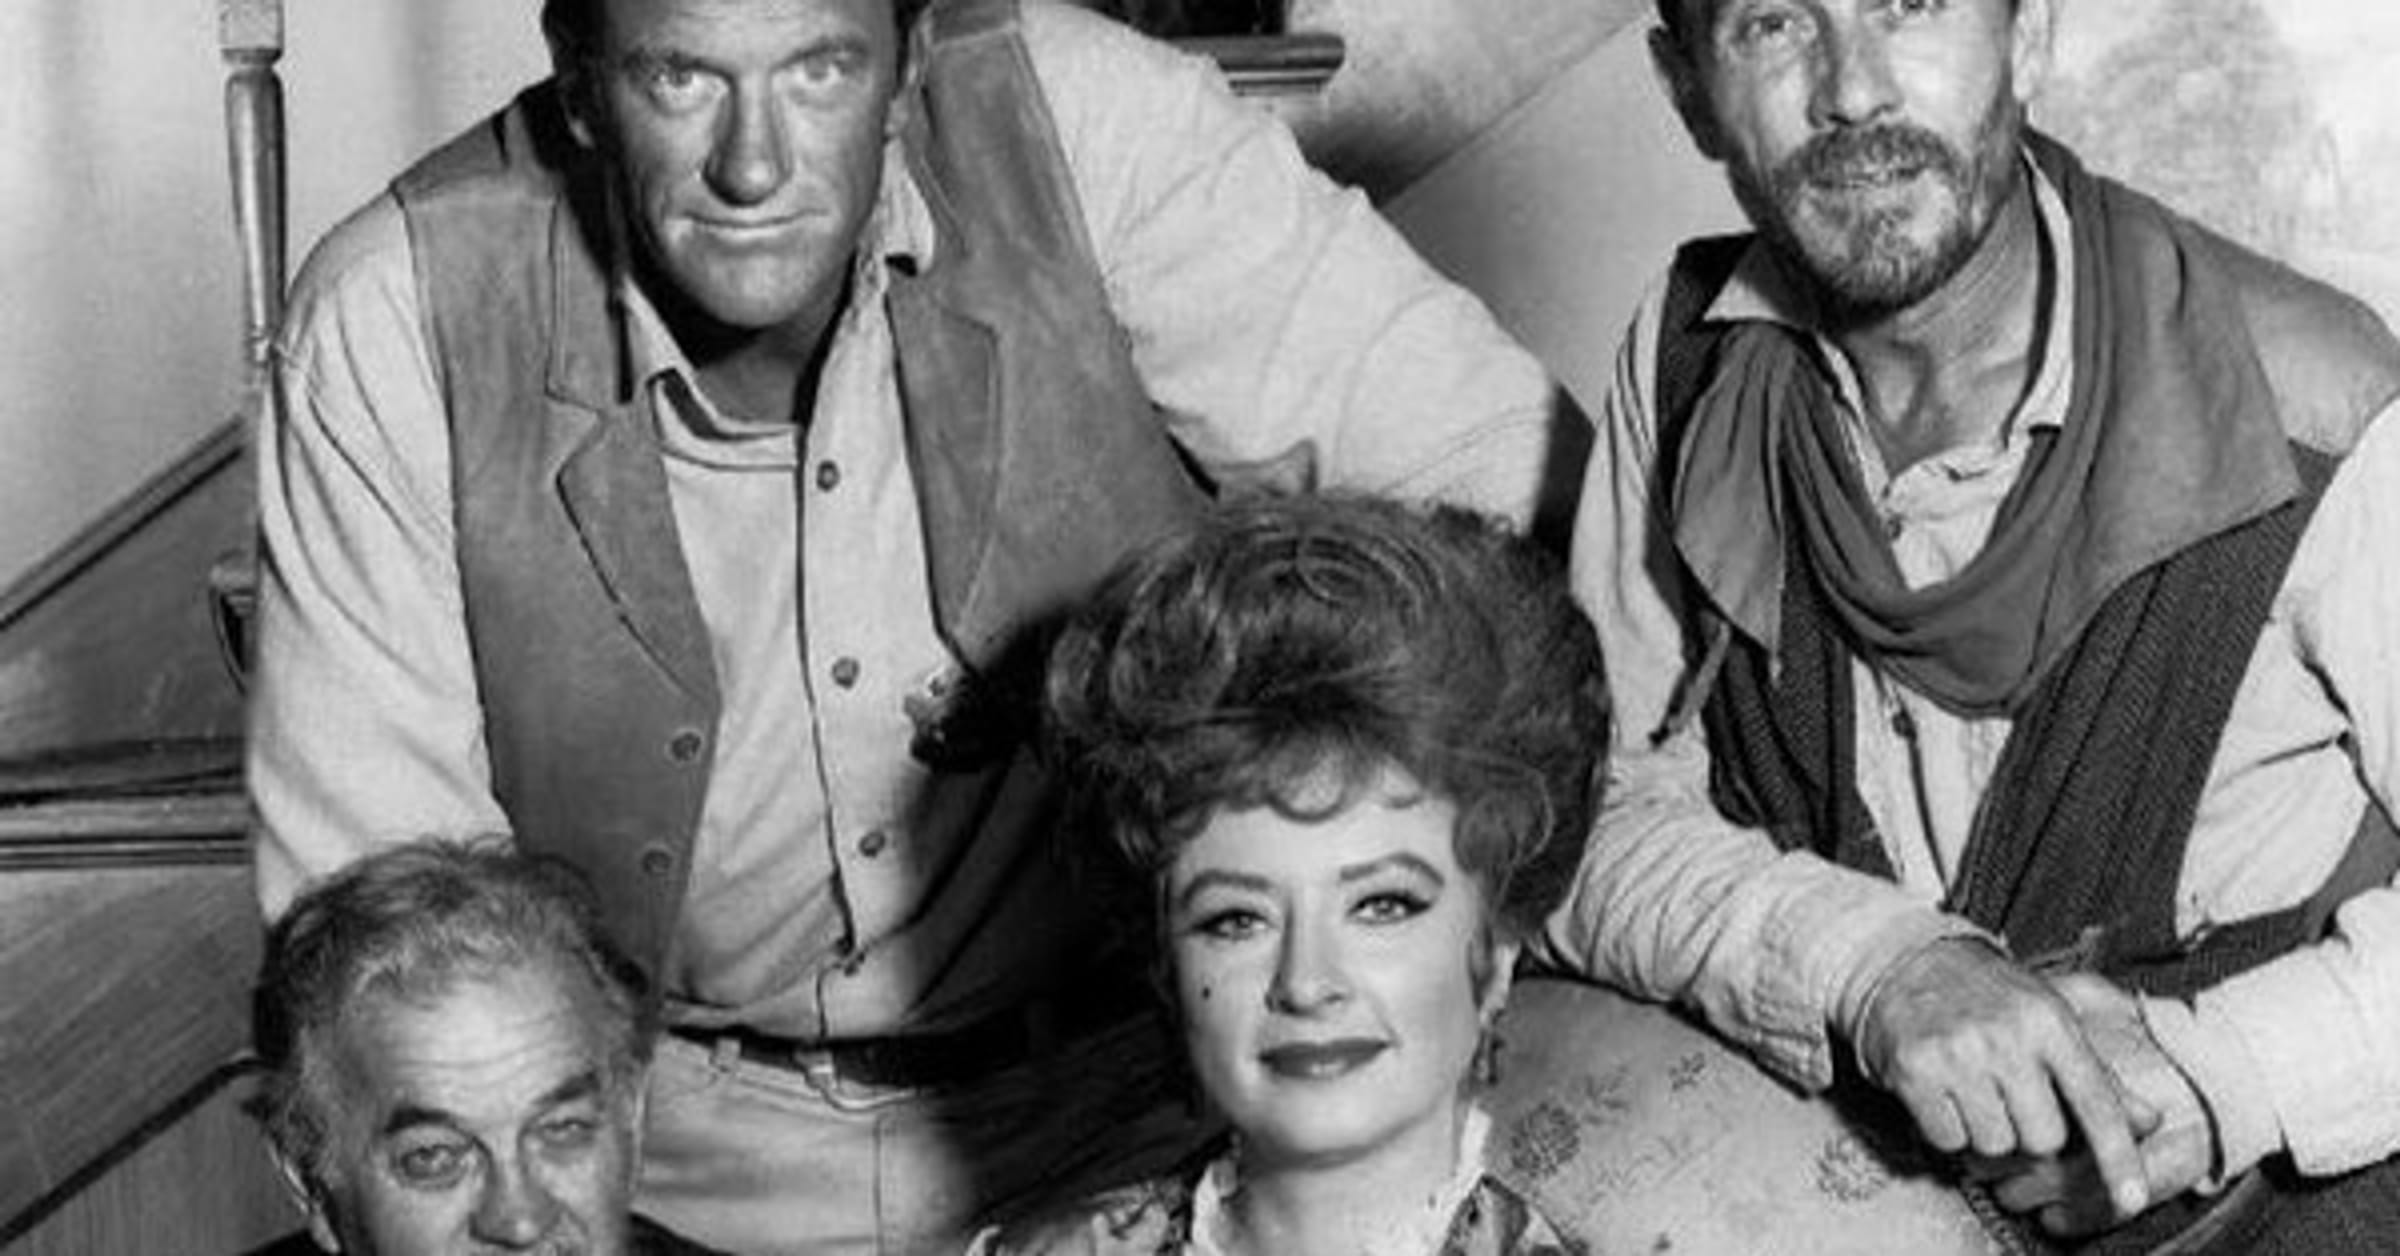 One man appeared in nearly 200 Gunsmoke episodes but was only